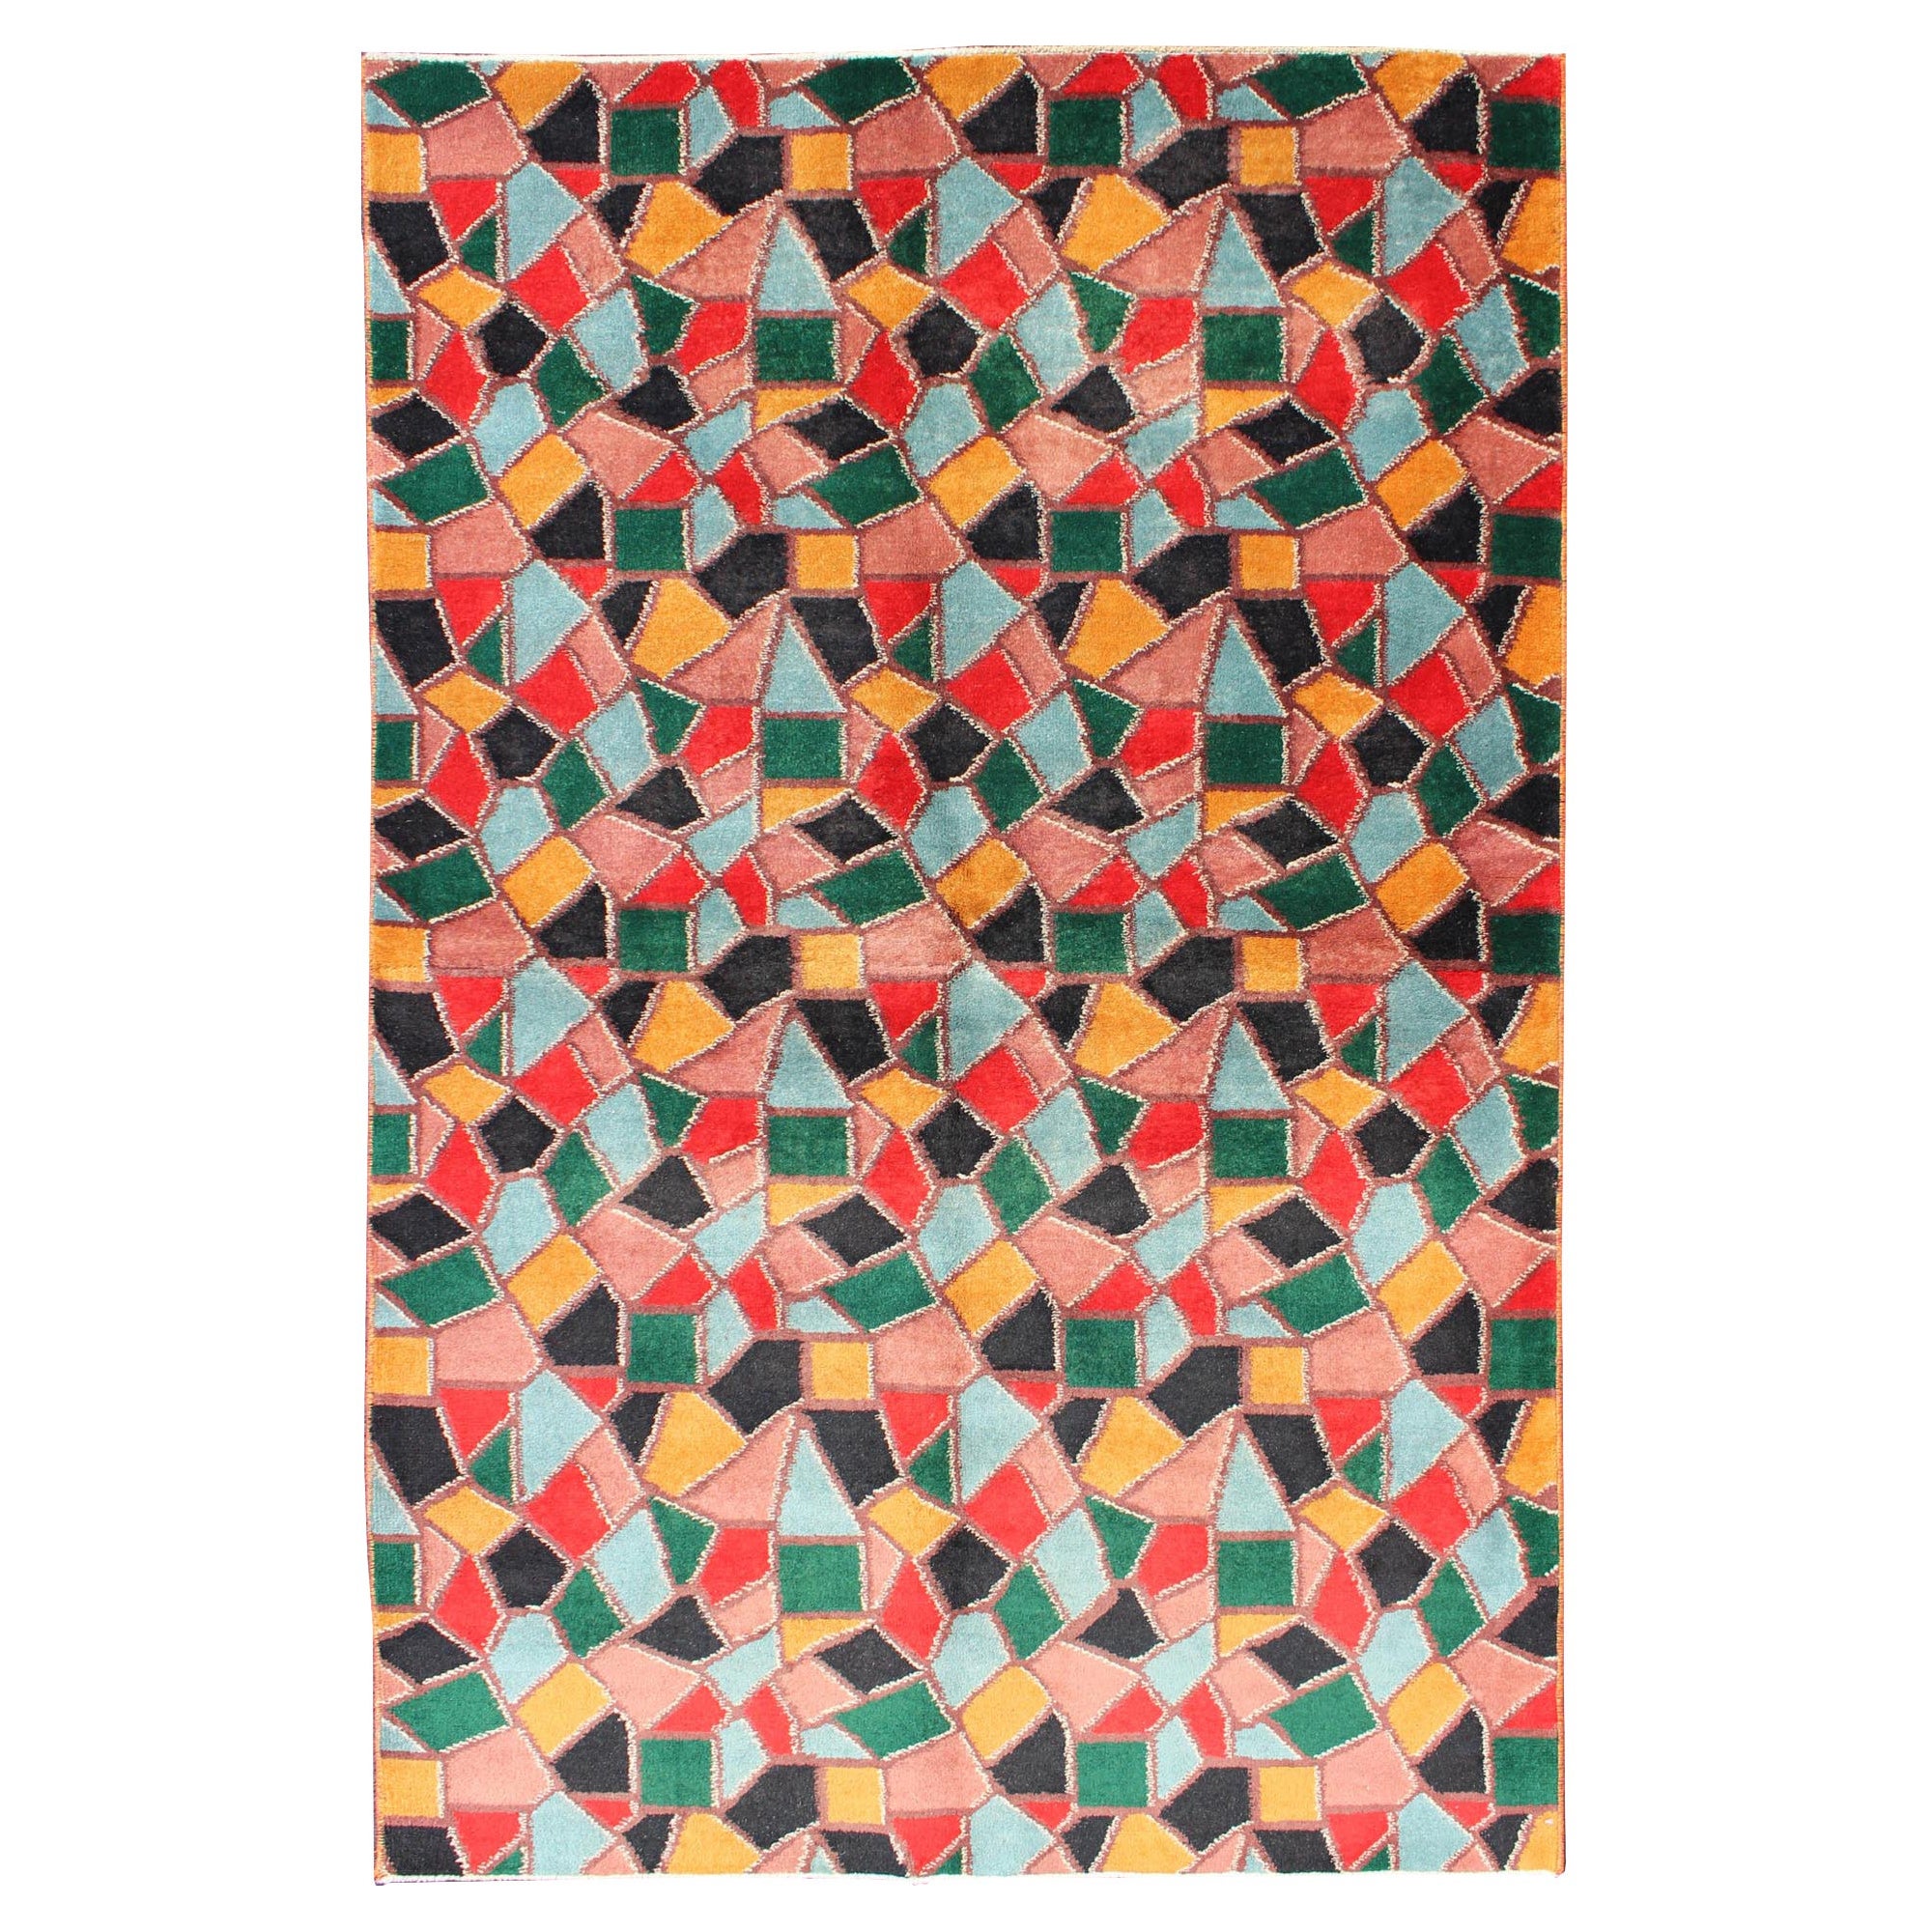 Mid-Century Modern Rug with Mosaic Design in Red, Yellow, Pink, Blue and Green